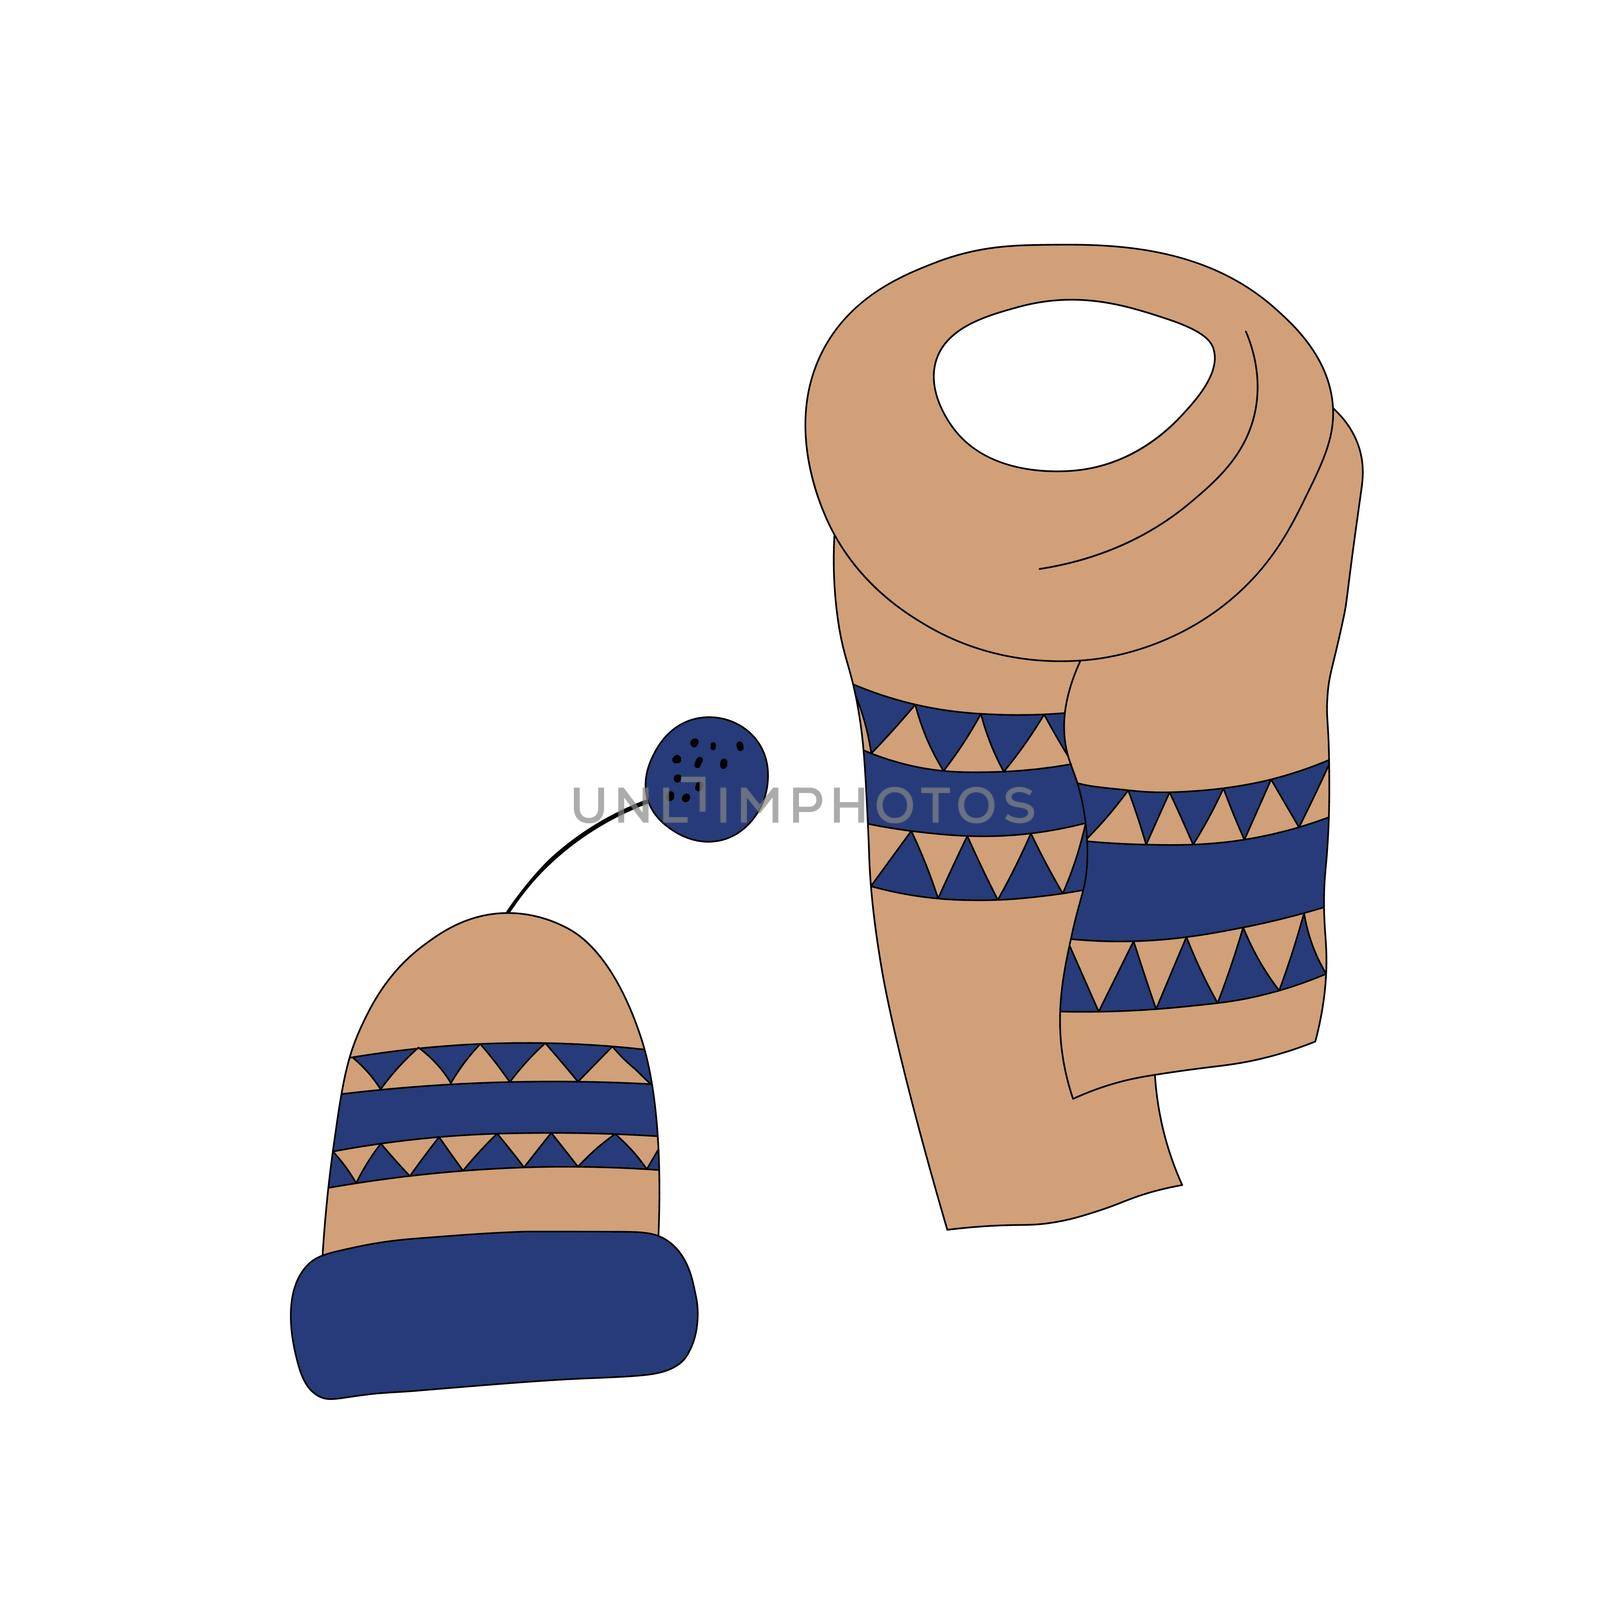 Set with winter accessories: hat and scarf. Cute vector winter warm knitted clothes collection in cartoon style. Christmas vector illustration. Template design for card, postcard, print